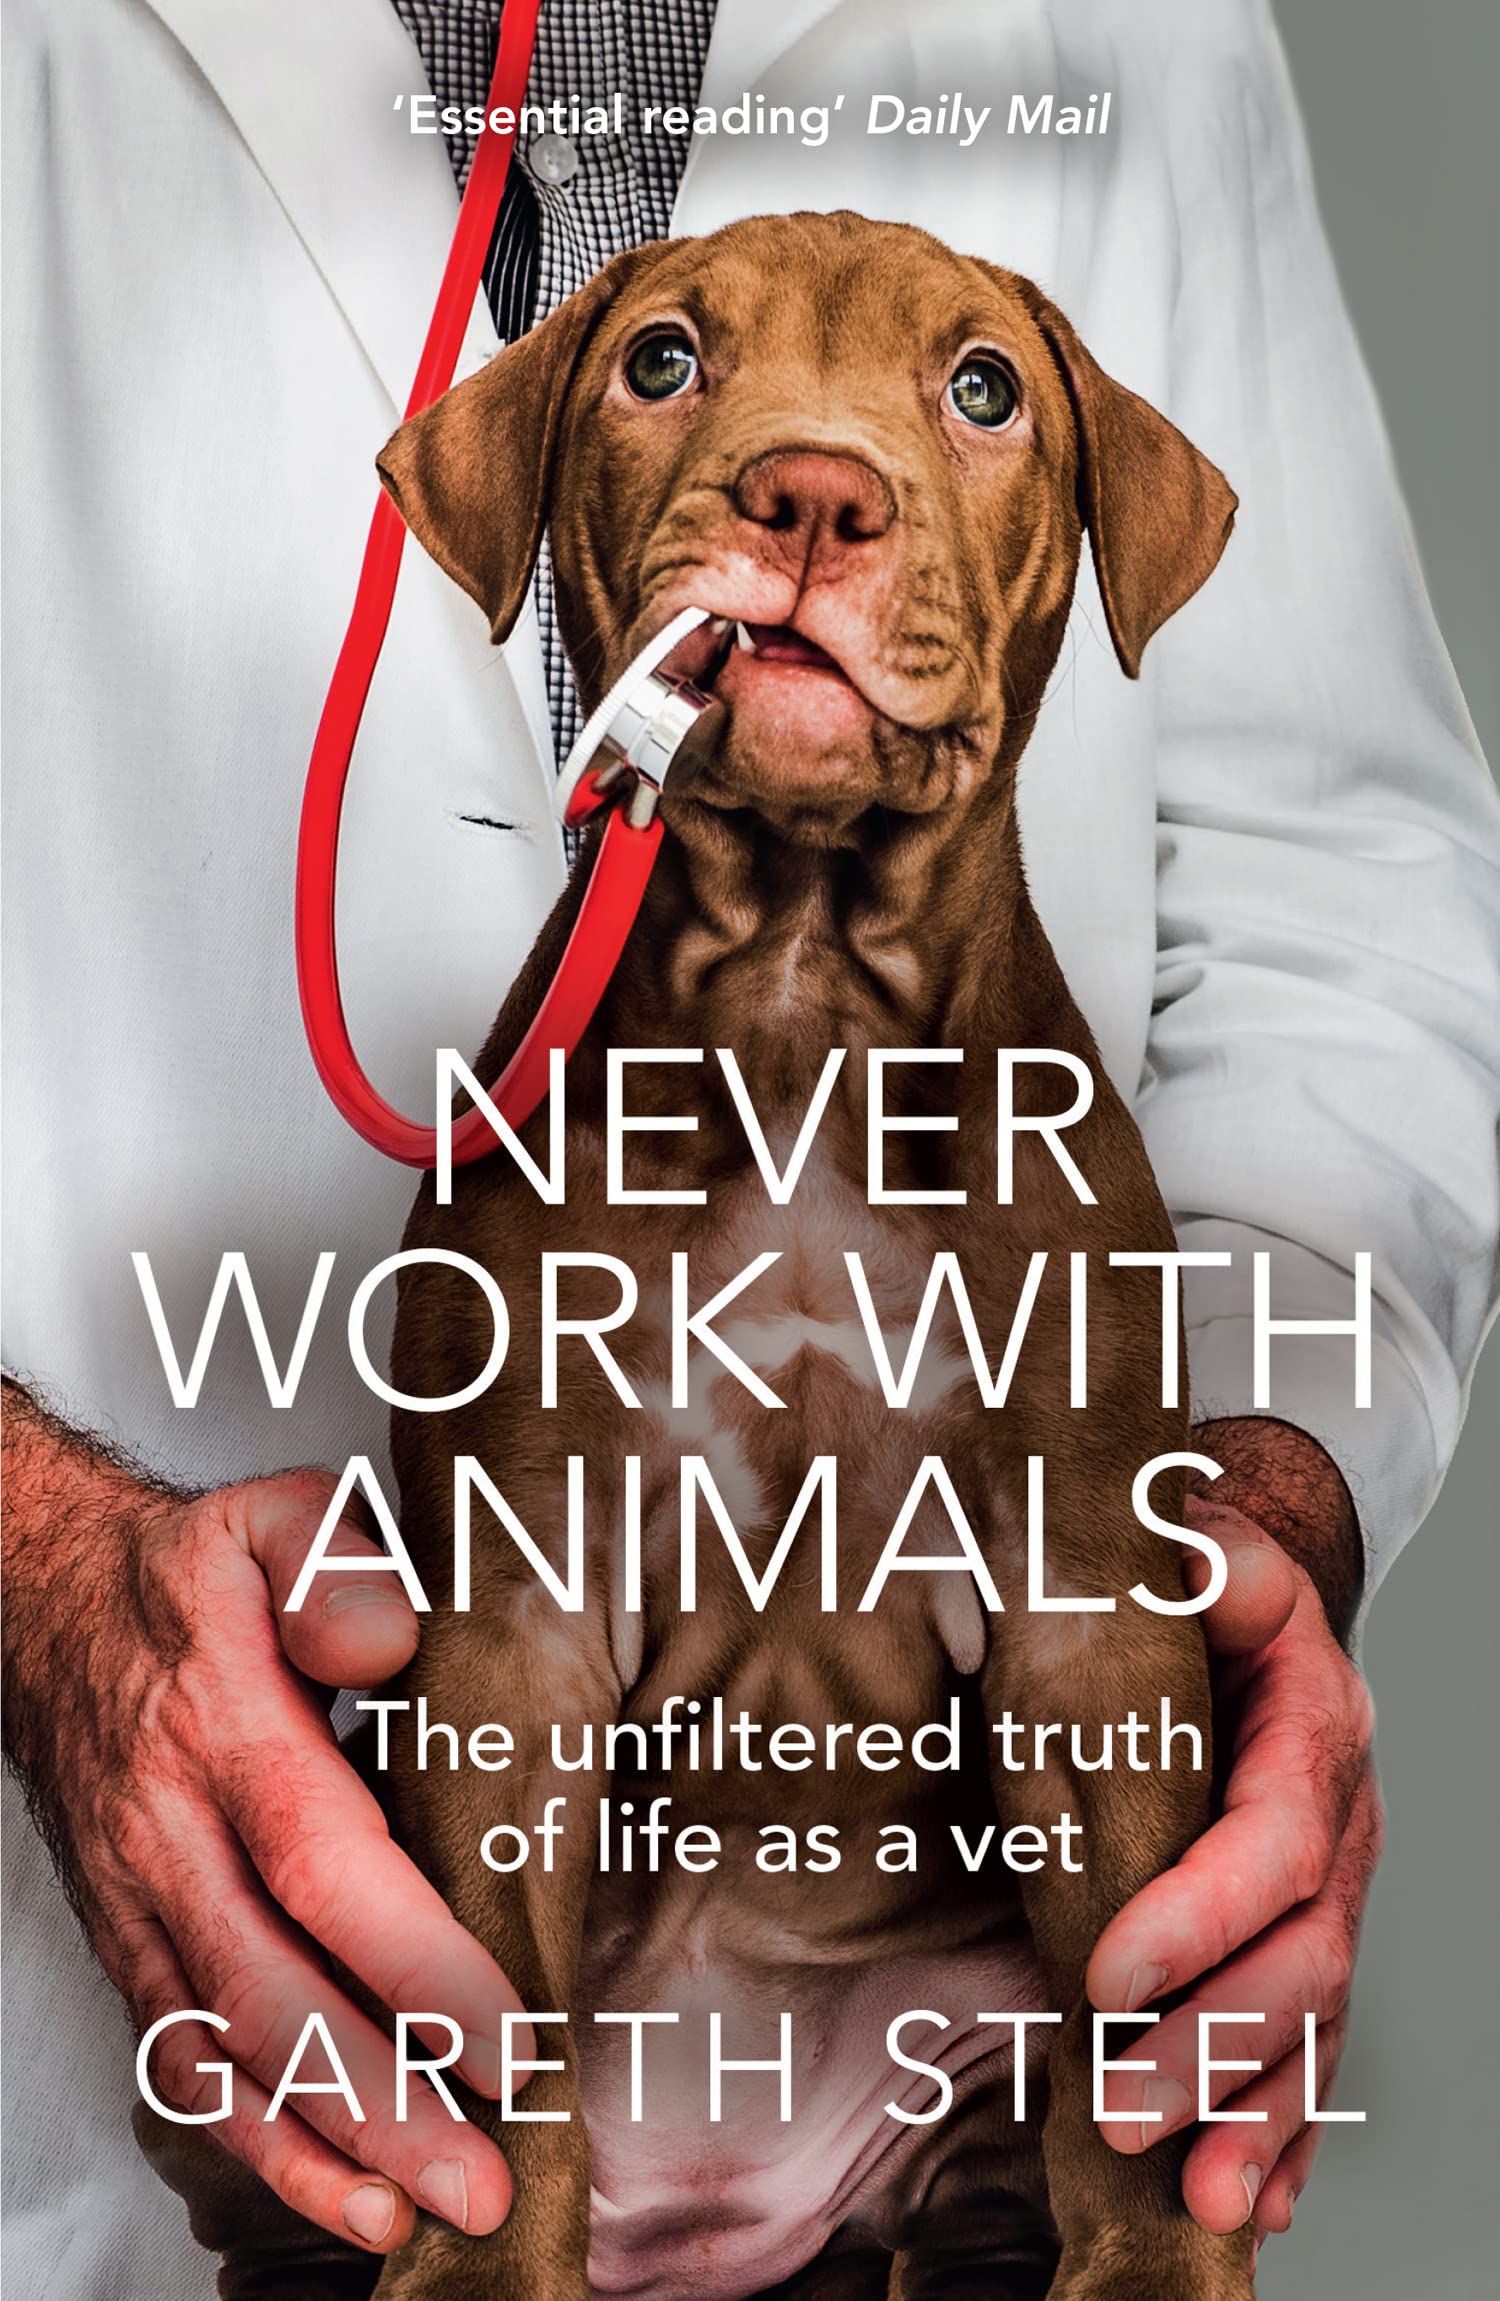 Never work with animals book